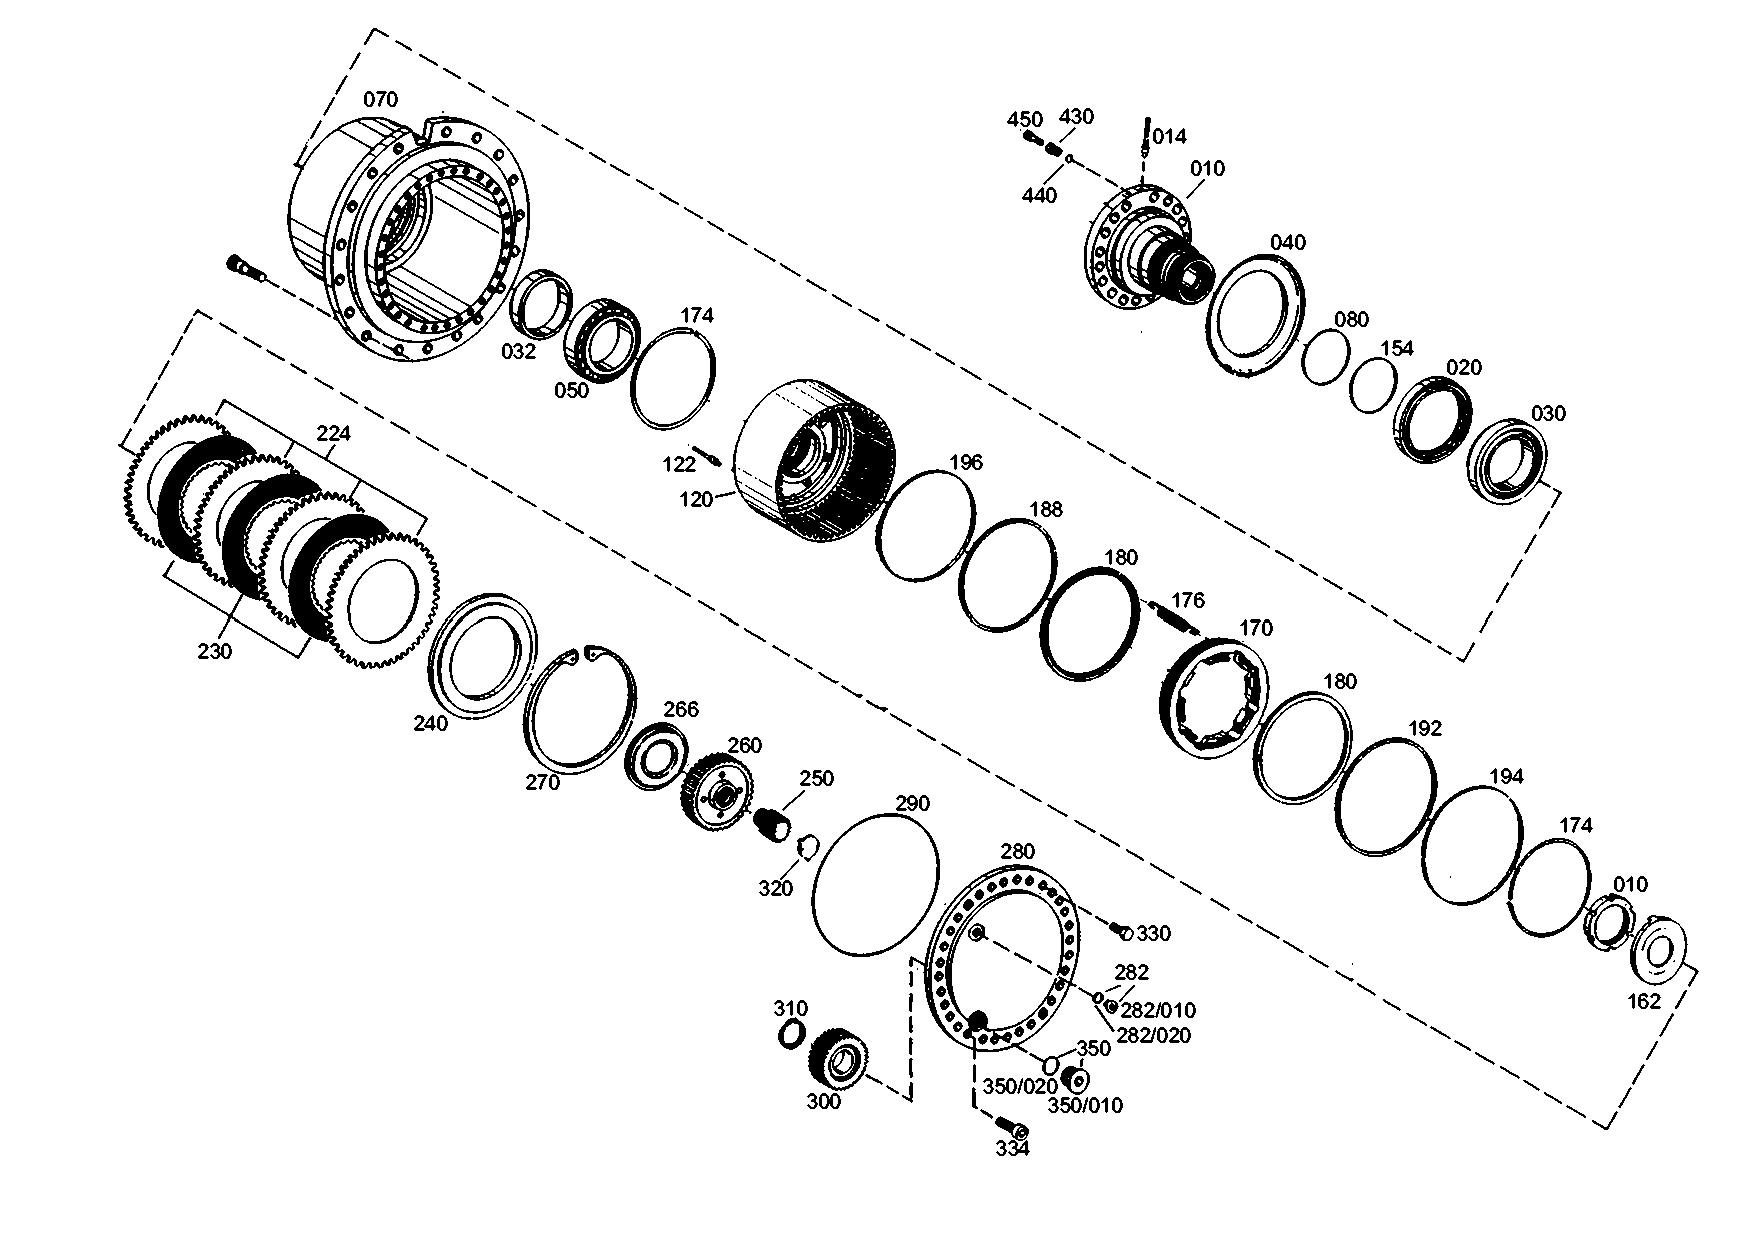 drawing for LIEBHERR GMBH 7623429 - PLANET CARRIER (figure 1)